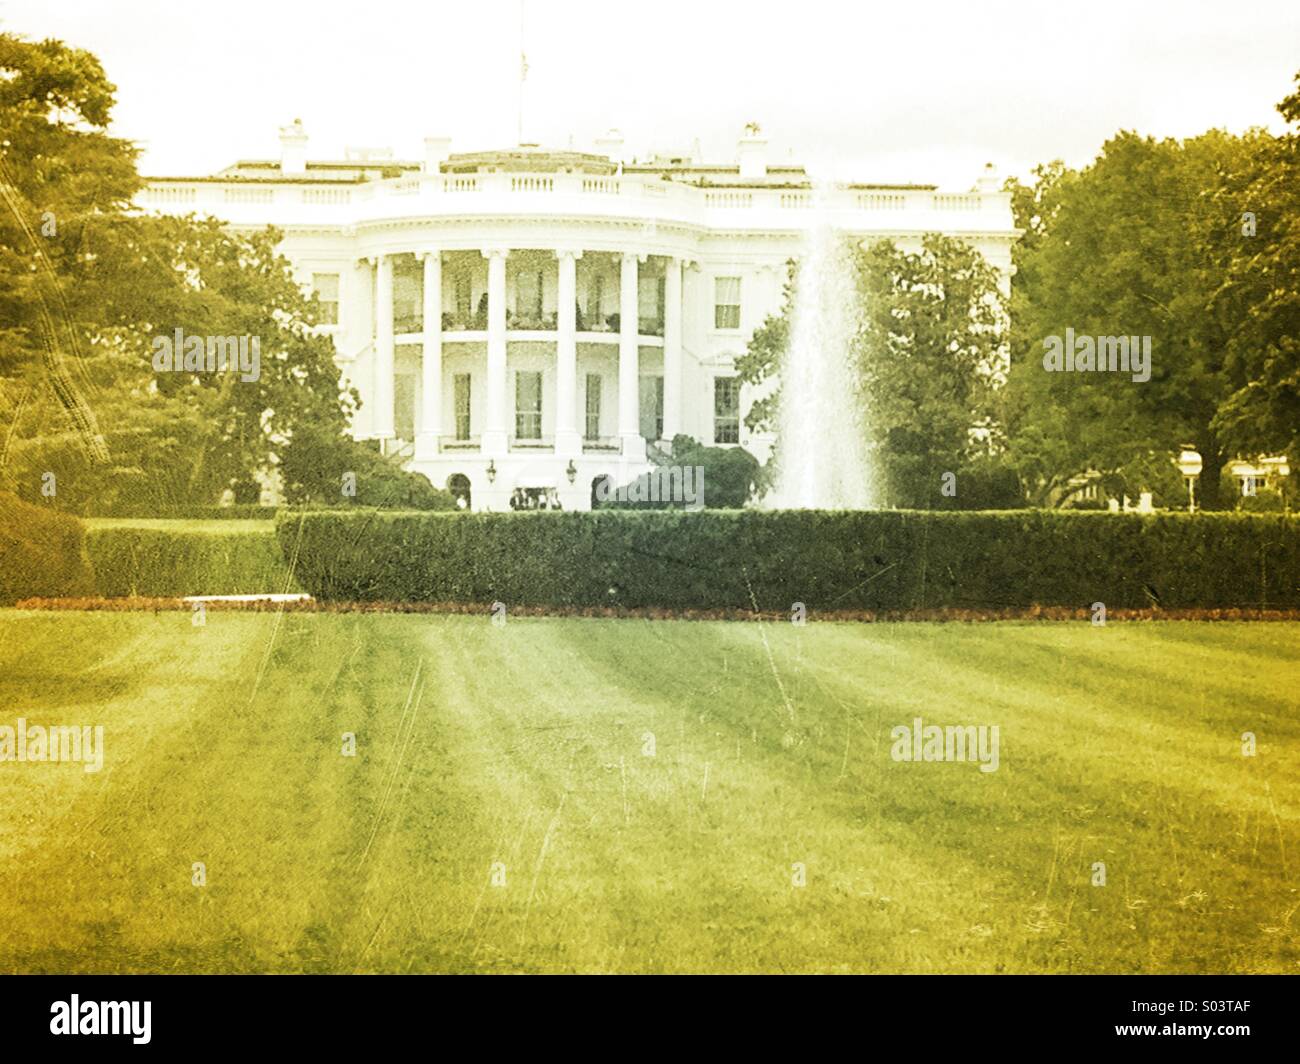 Archival-themed image of The White House in Washington, D.C., USA. Stock Photo